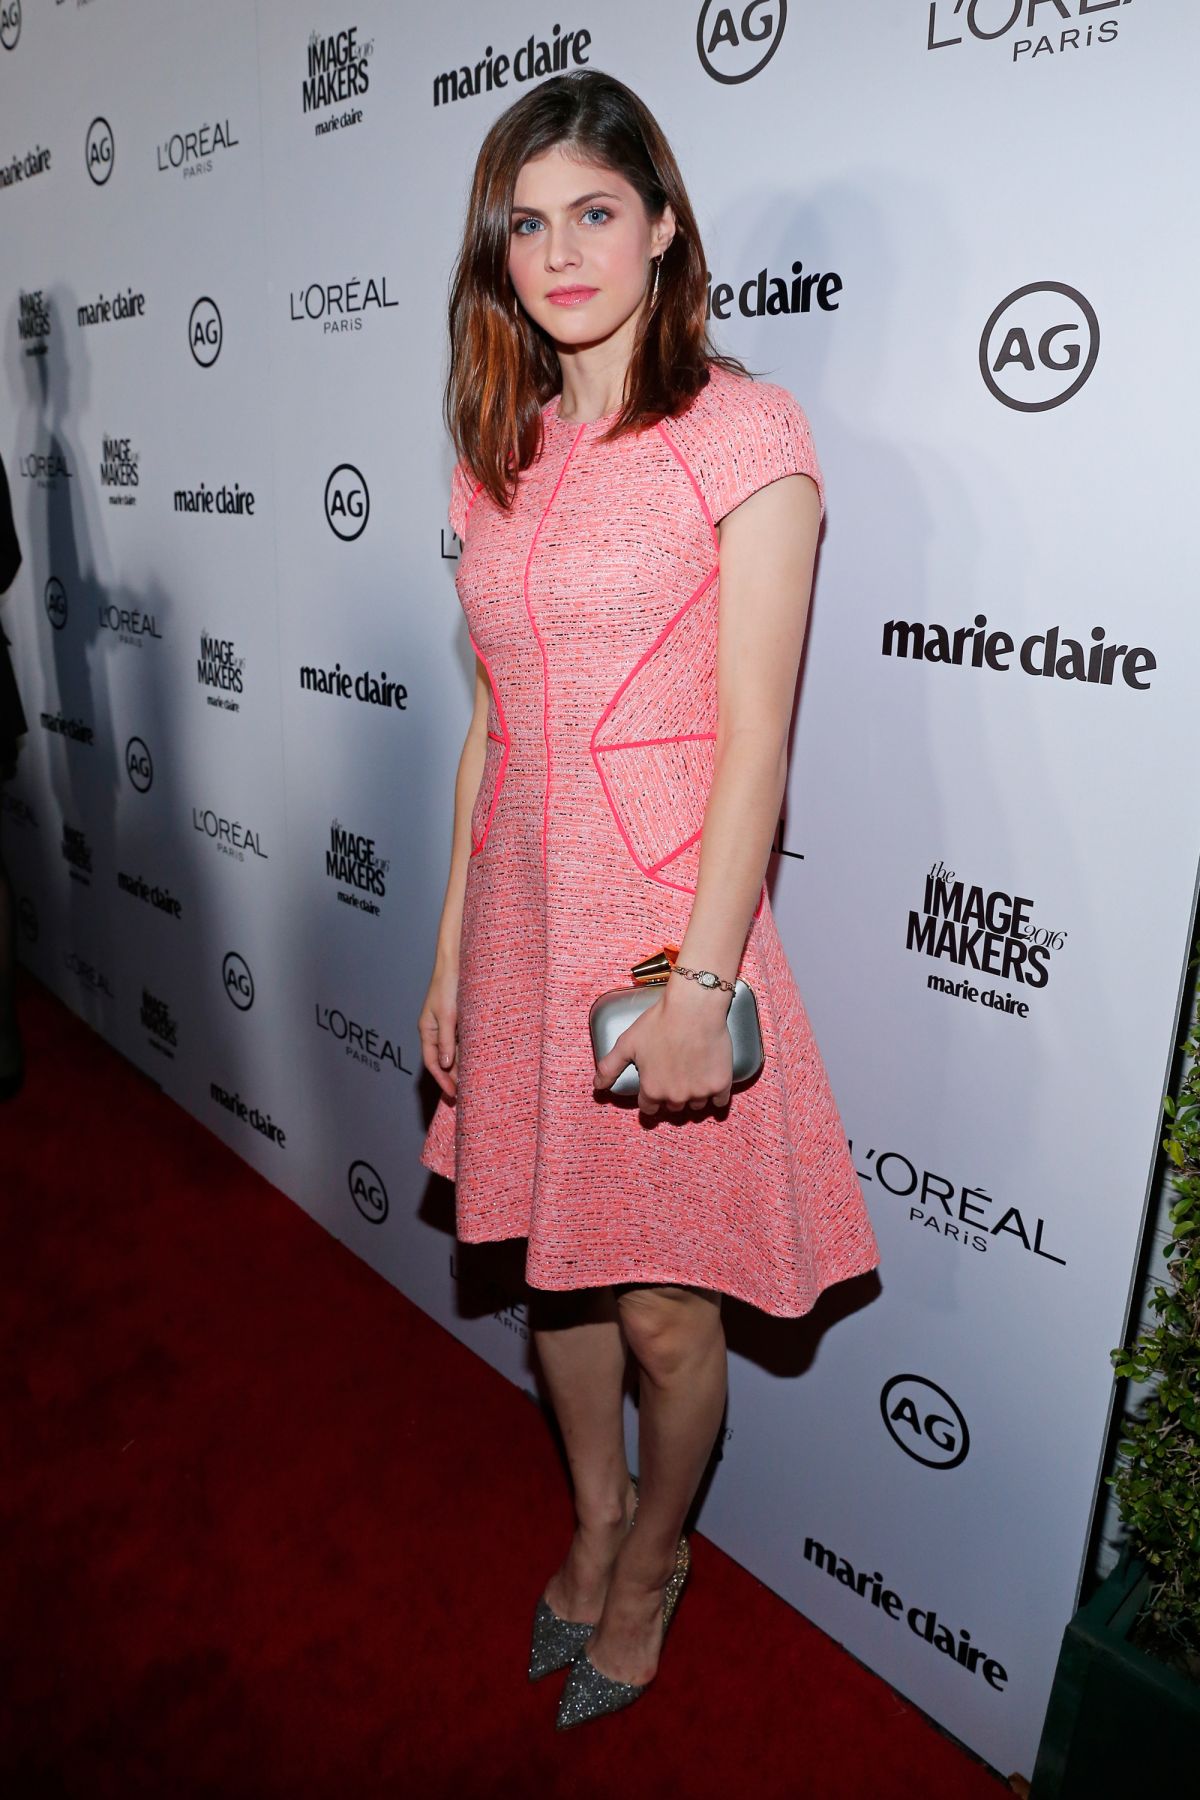 ALEXANDRA DADDARIO at 2016 Marie Claire’s Image Makers Awards in Los ...